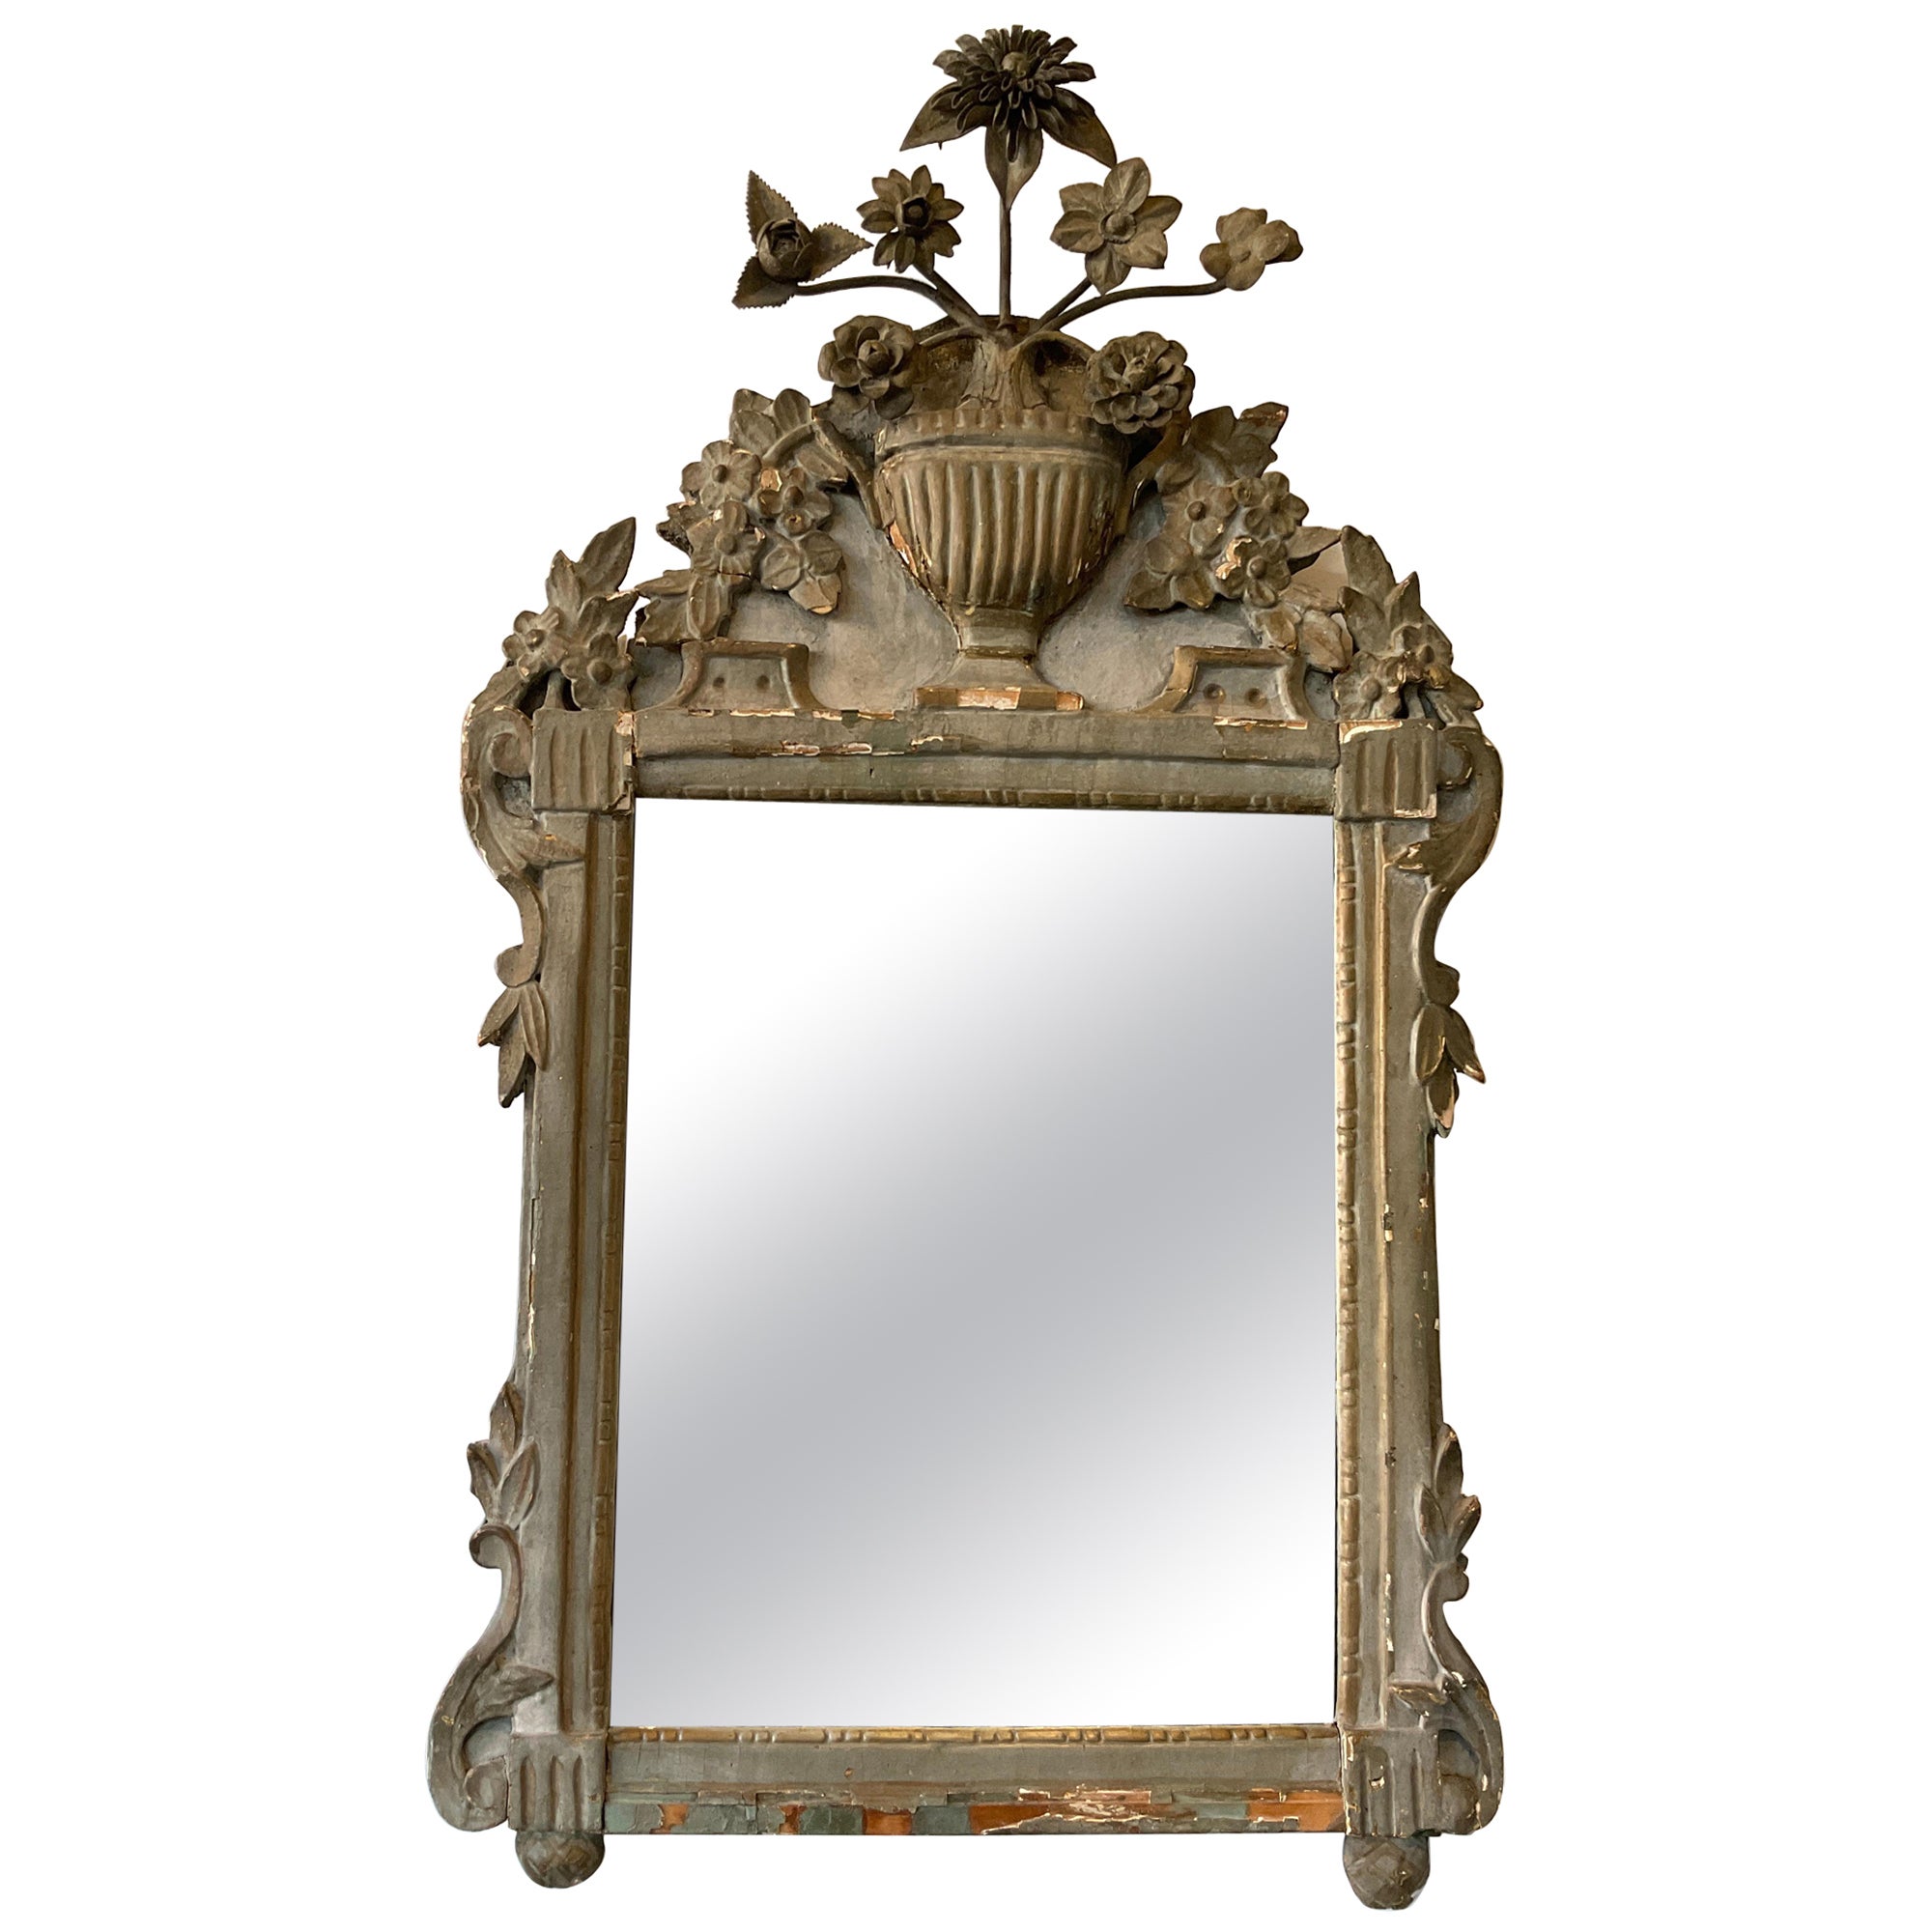 1840s  Grey Painted Carved Wood French Mirror With Metal Flowers